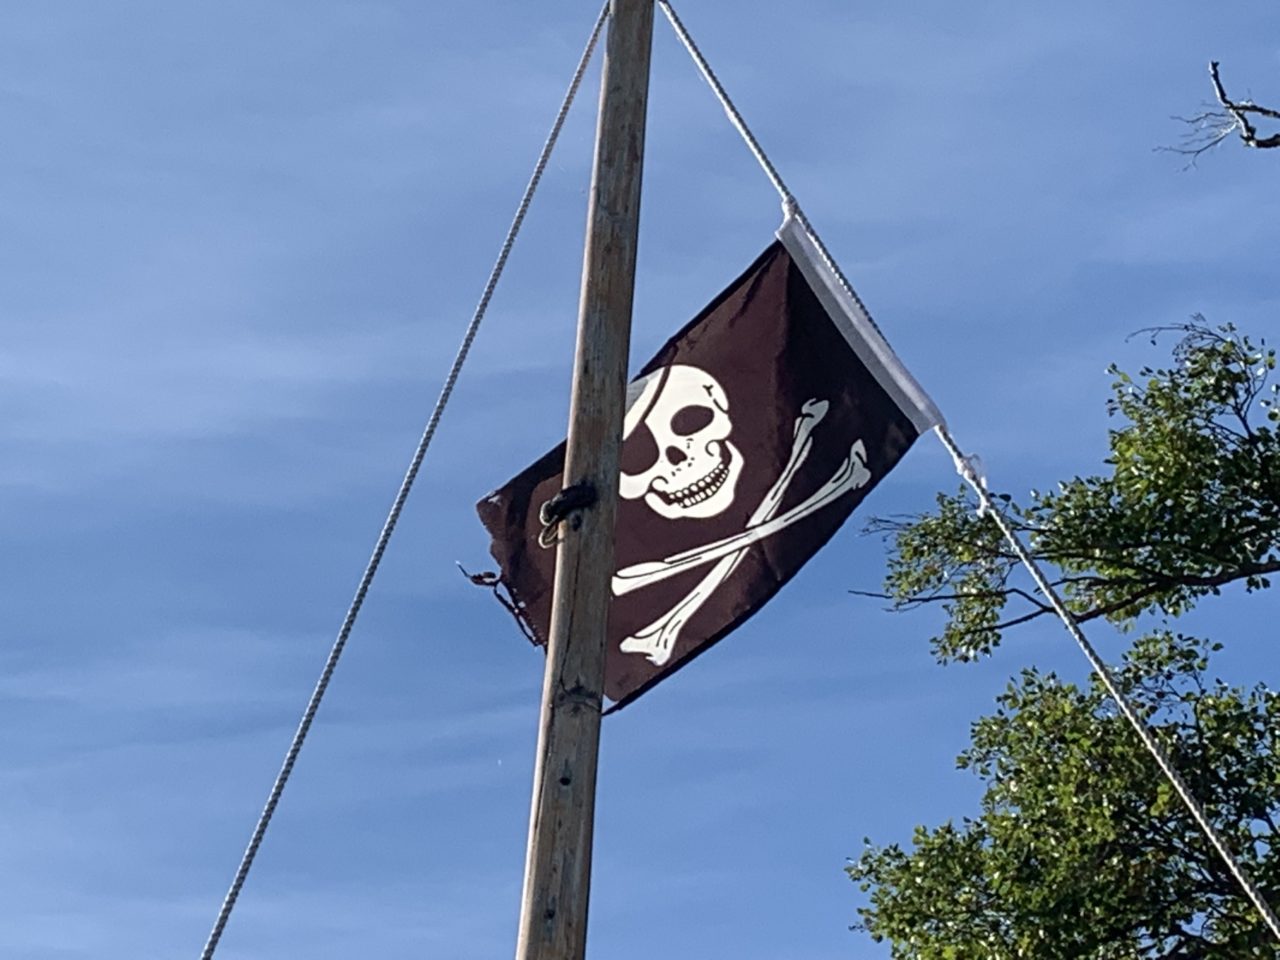 Jolly Roger Flag On Boat Mast In The Wind